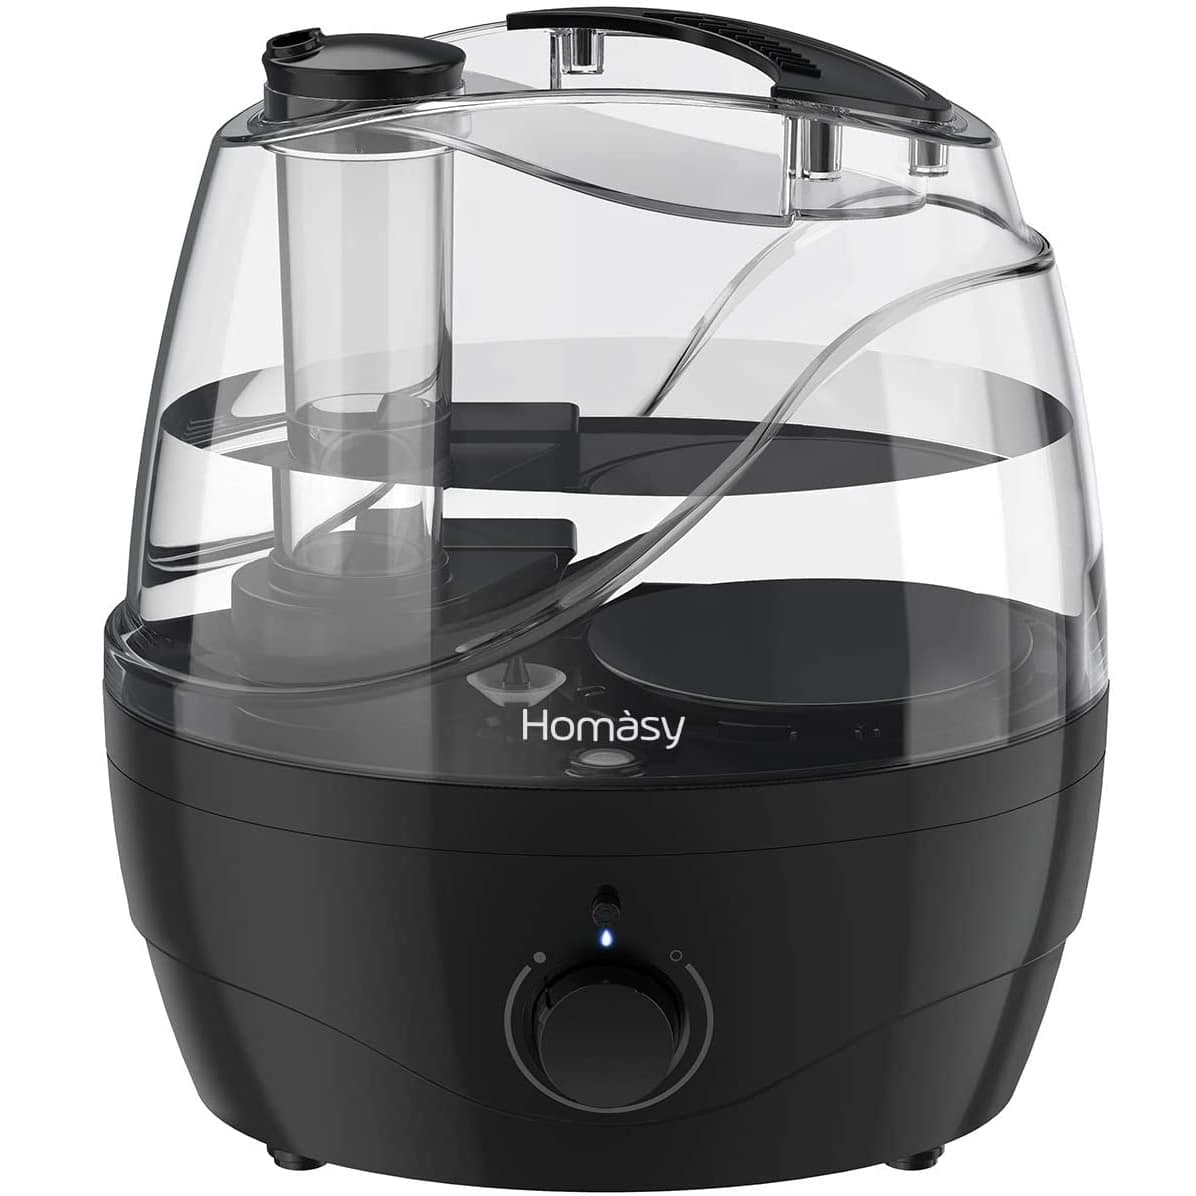 Homasy Cool Mist Humidifier 2.2L